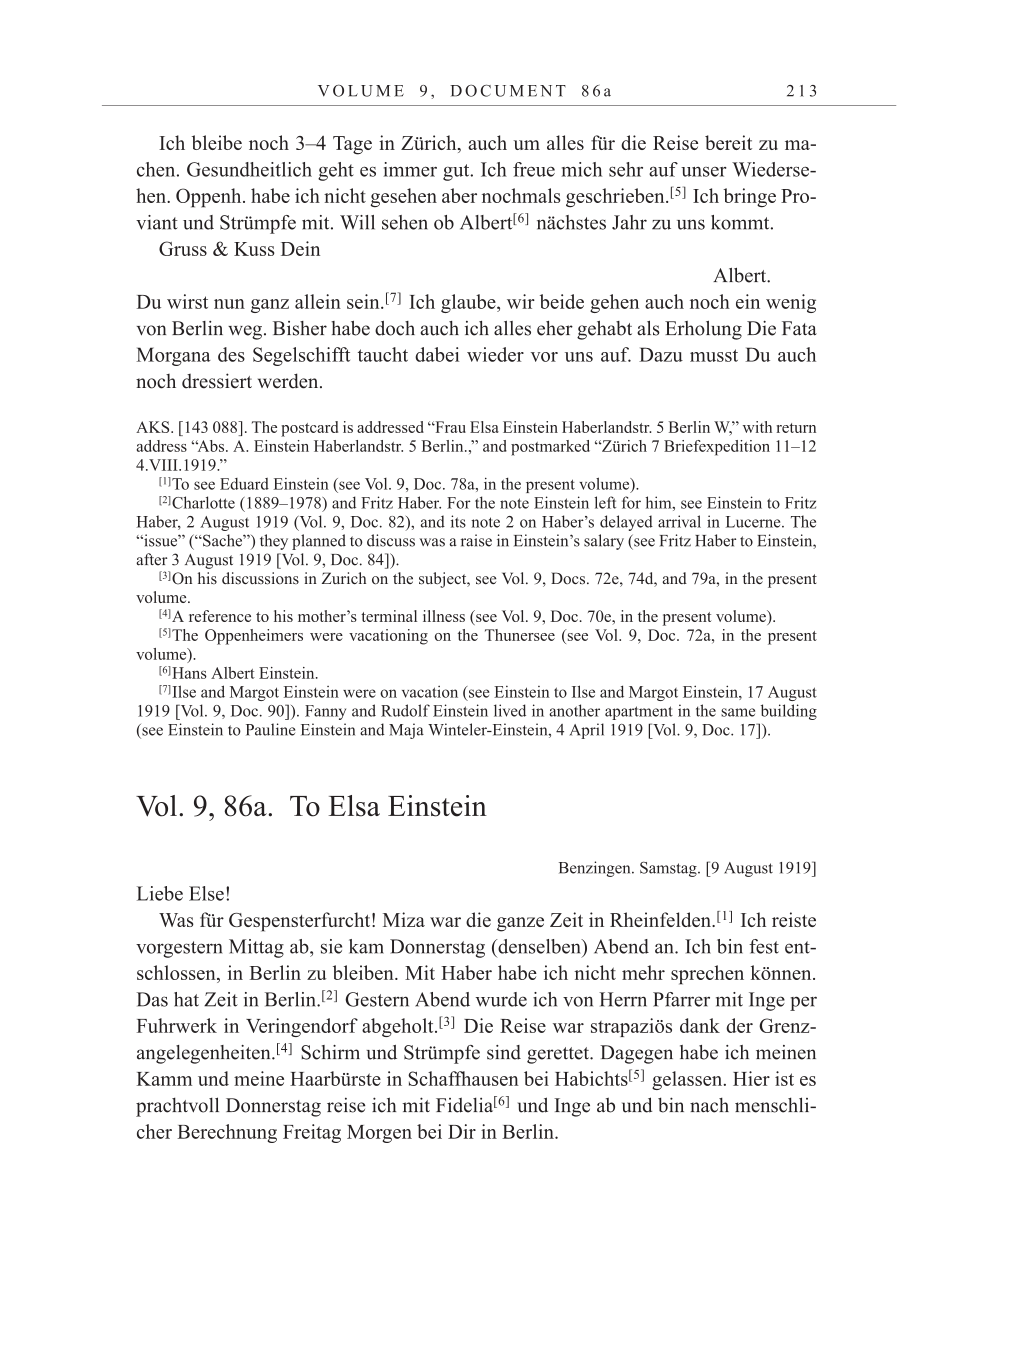 Volume 10: The Berlin Years: Correspondence May-December 1920 / Supplementary Correspondence 1909-1920 page 213